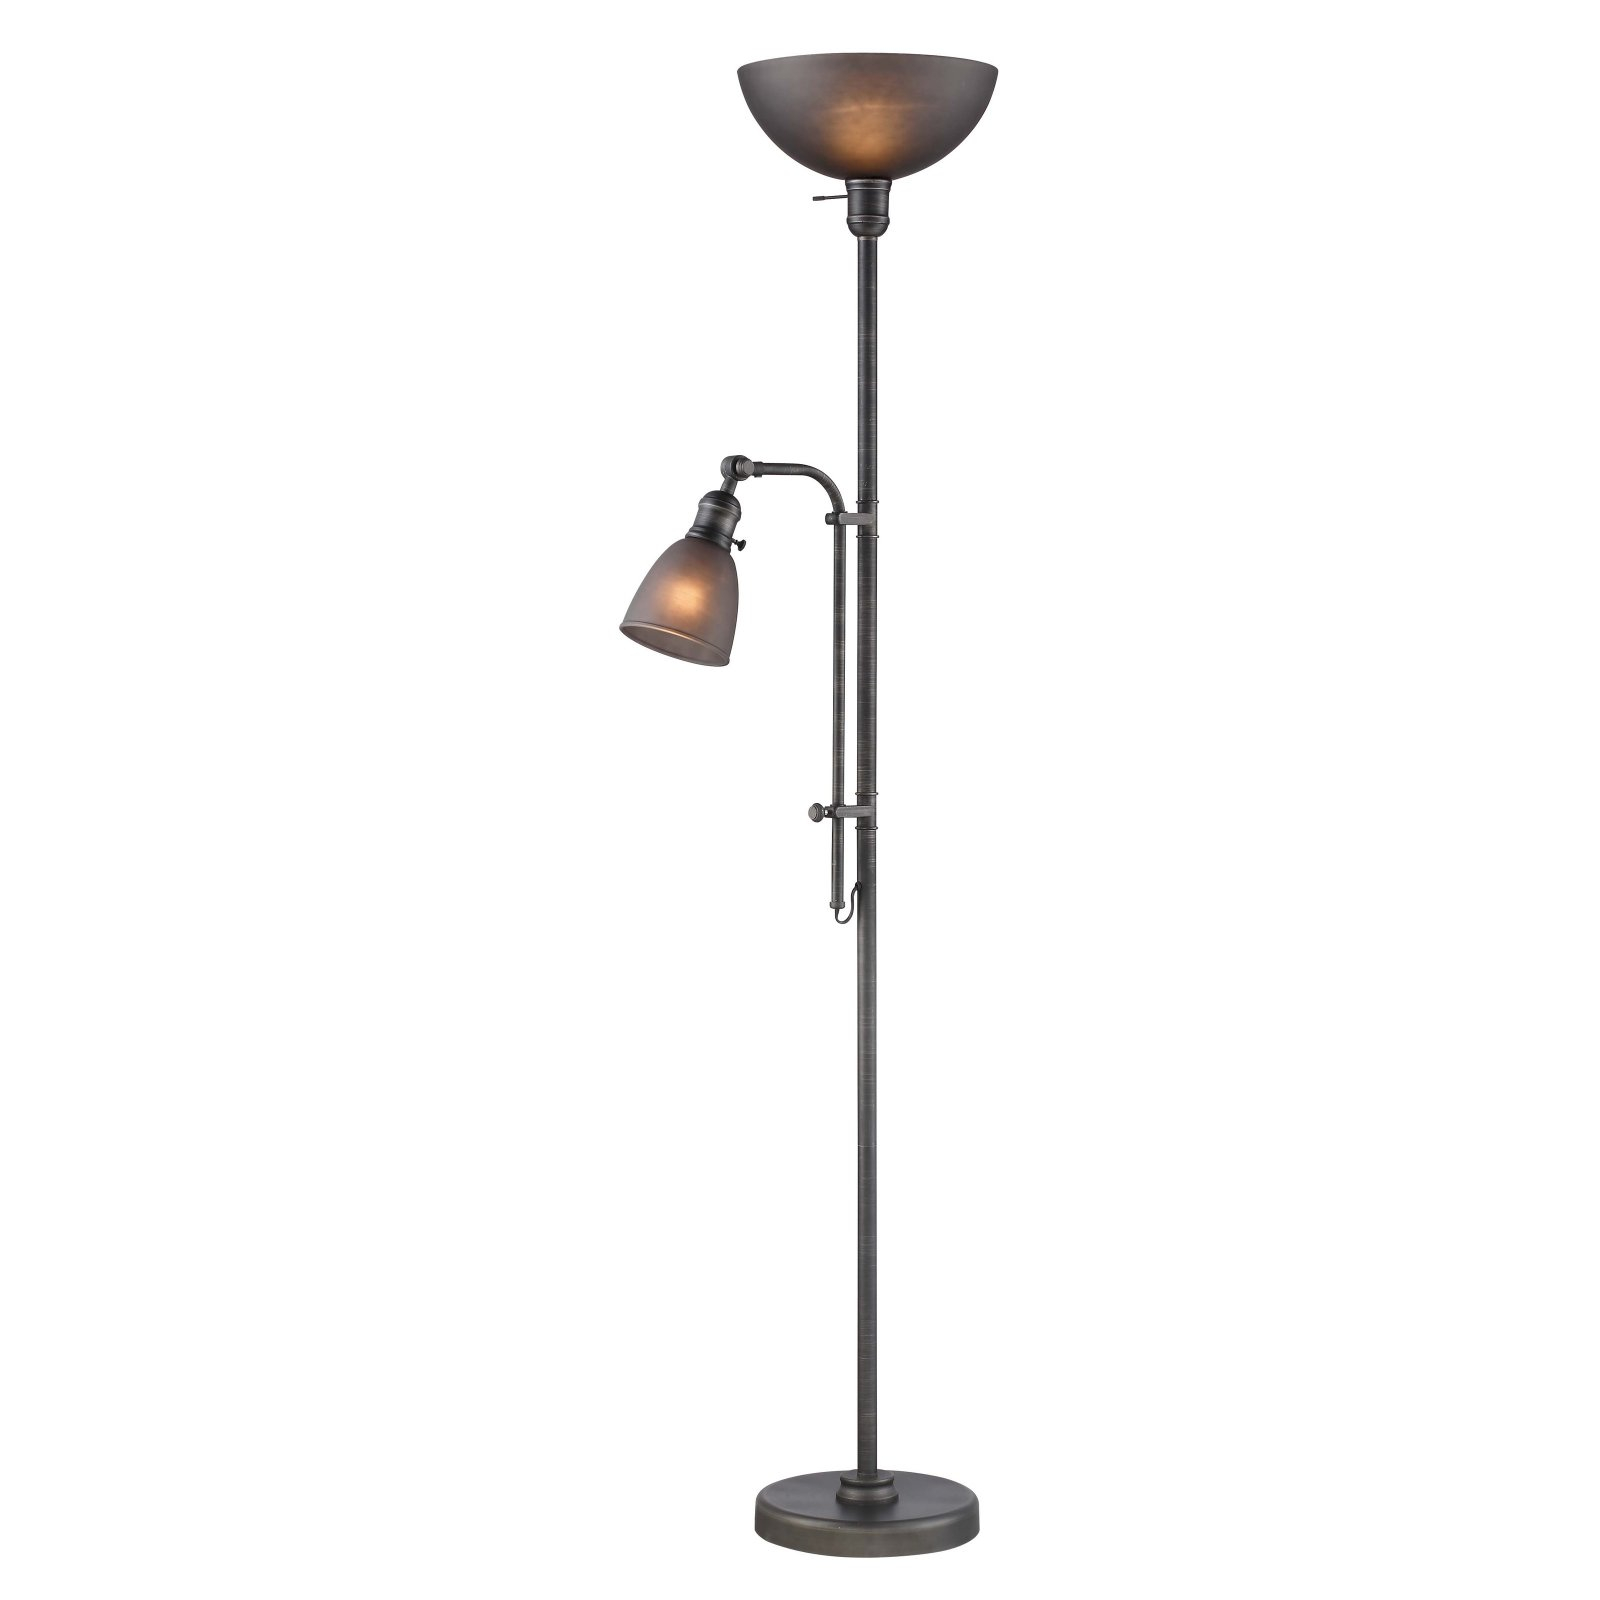 Normande Lighting Torchiere Floor Lamp With Side Reading Lamp Walmart inside dimensions 1600 X 1600